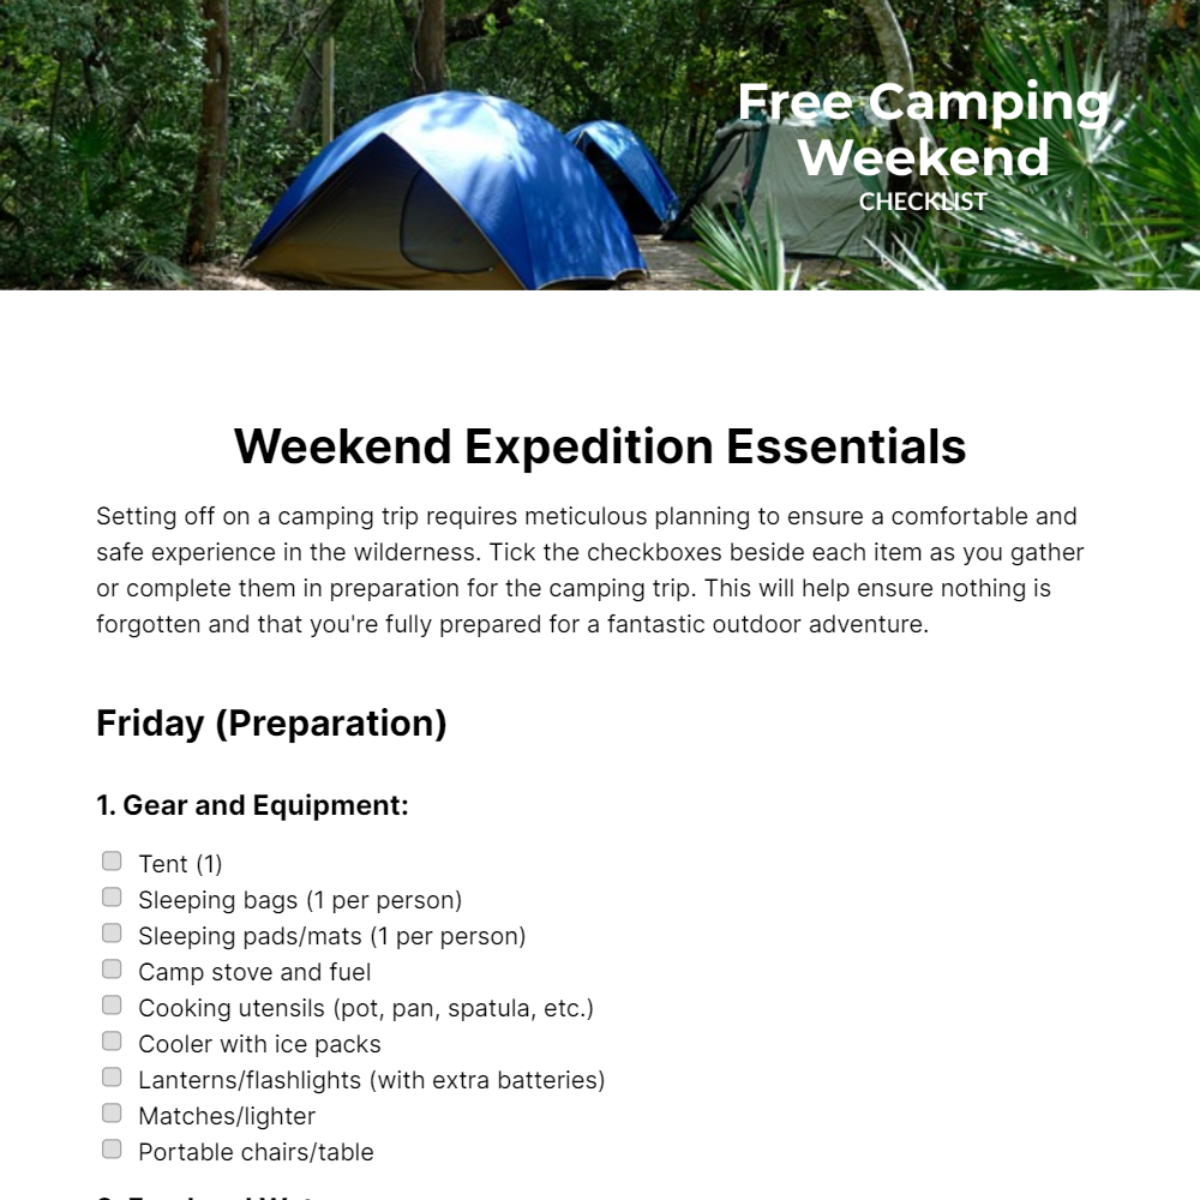 Free Camping Weekend Checklist Template